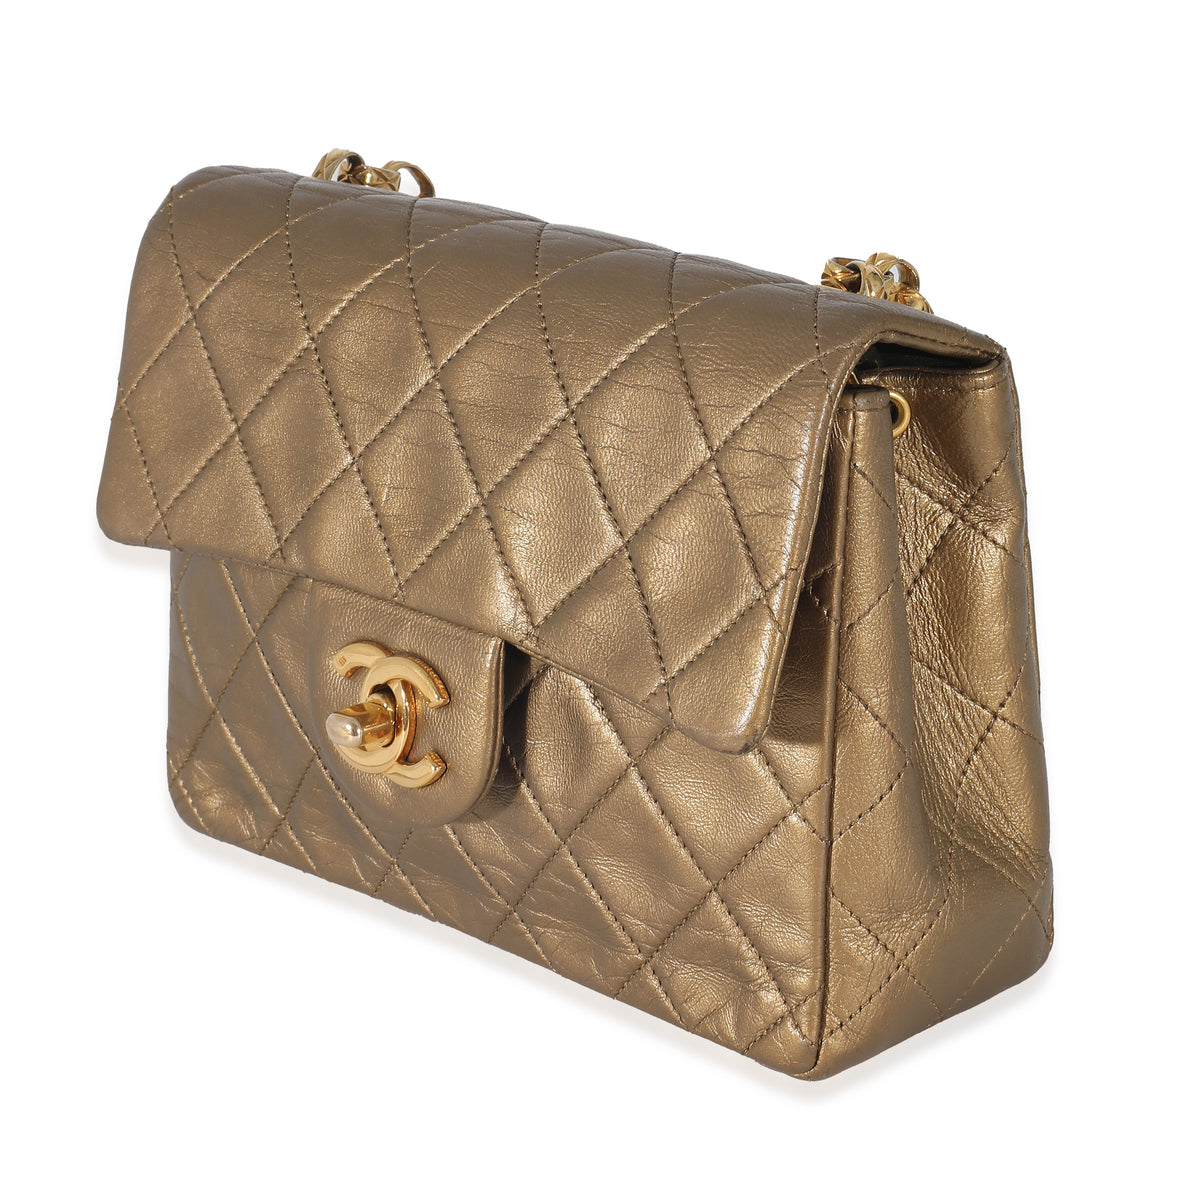 Chanel Vintage Quilted Metallic Gold Leather Bijoux Chain Mini Flap Bag